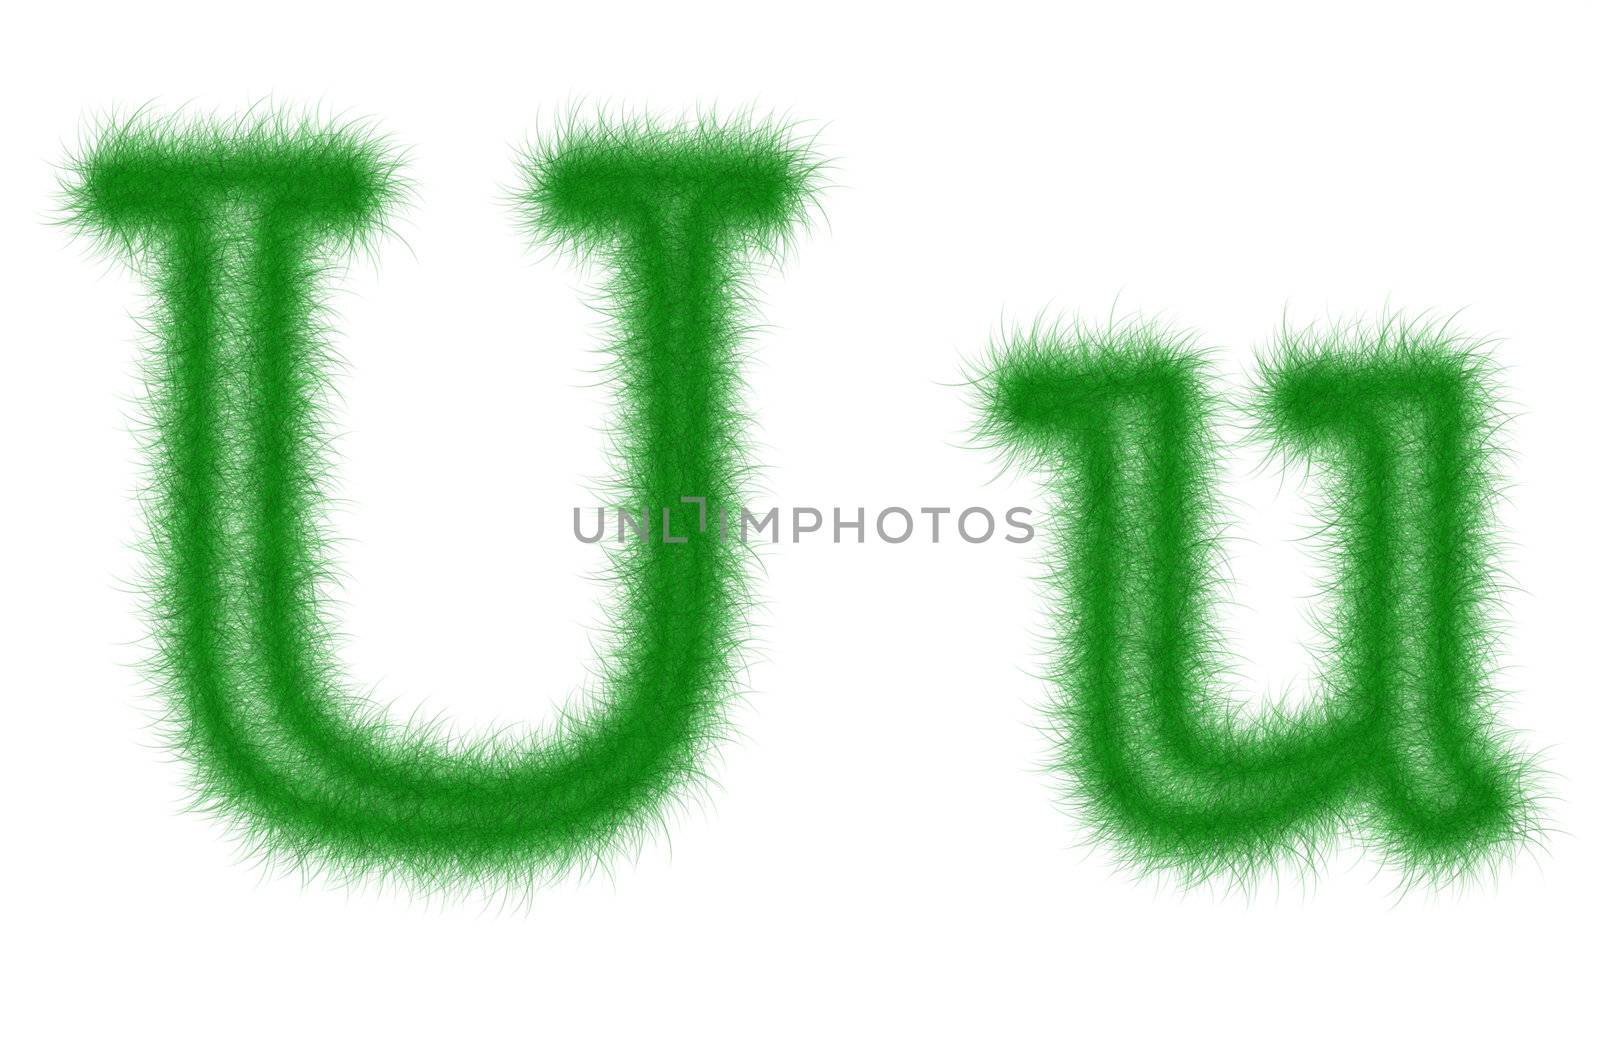 Green grass font isolated on white background